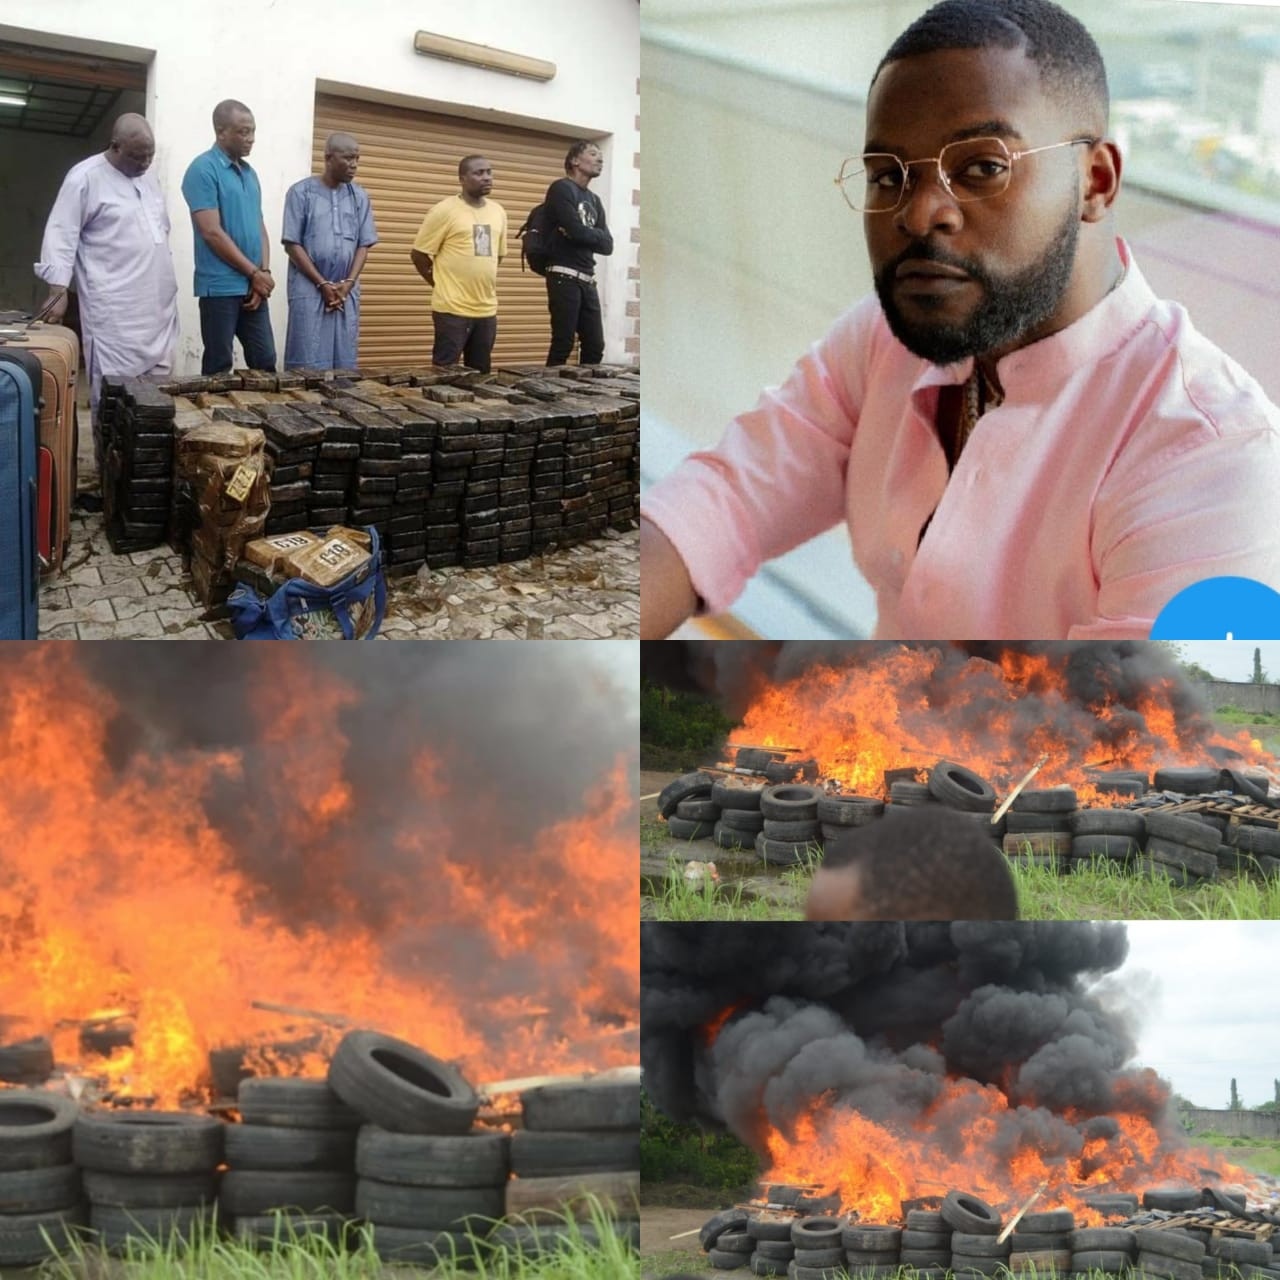 This administration must really think we are daft - Falz reacts to news of NDLEA destroying N194bn worth of cocaine seized in Lagos state some weeks ago